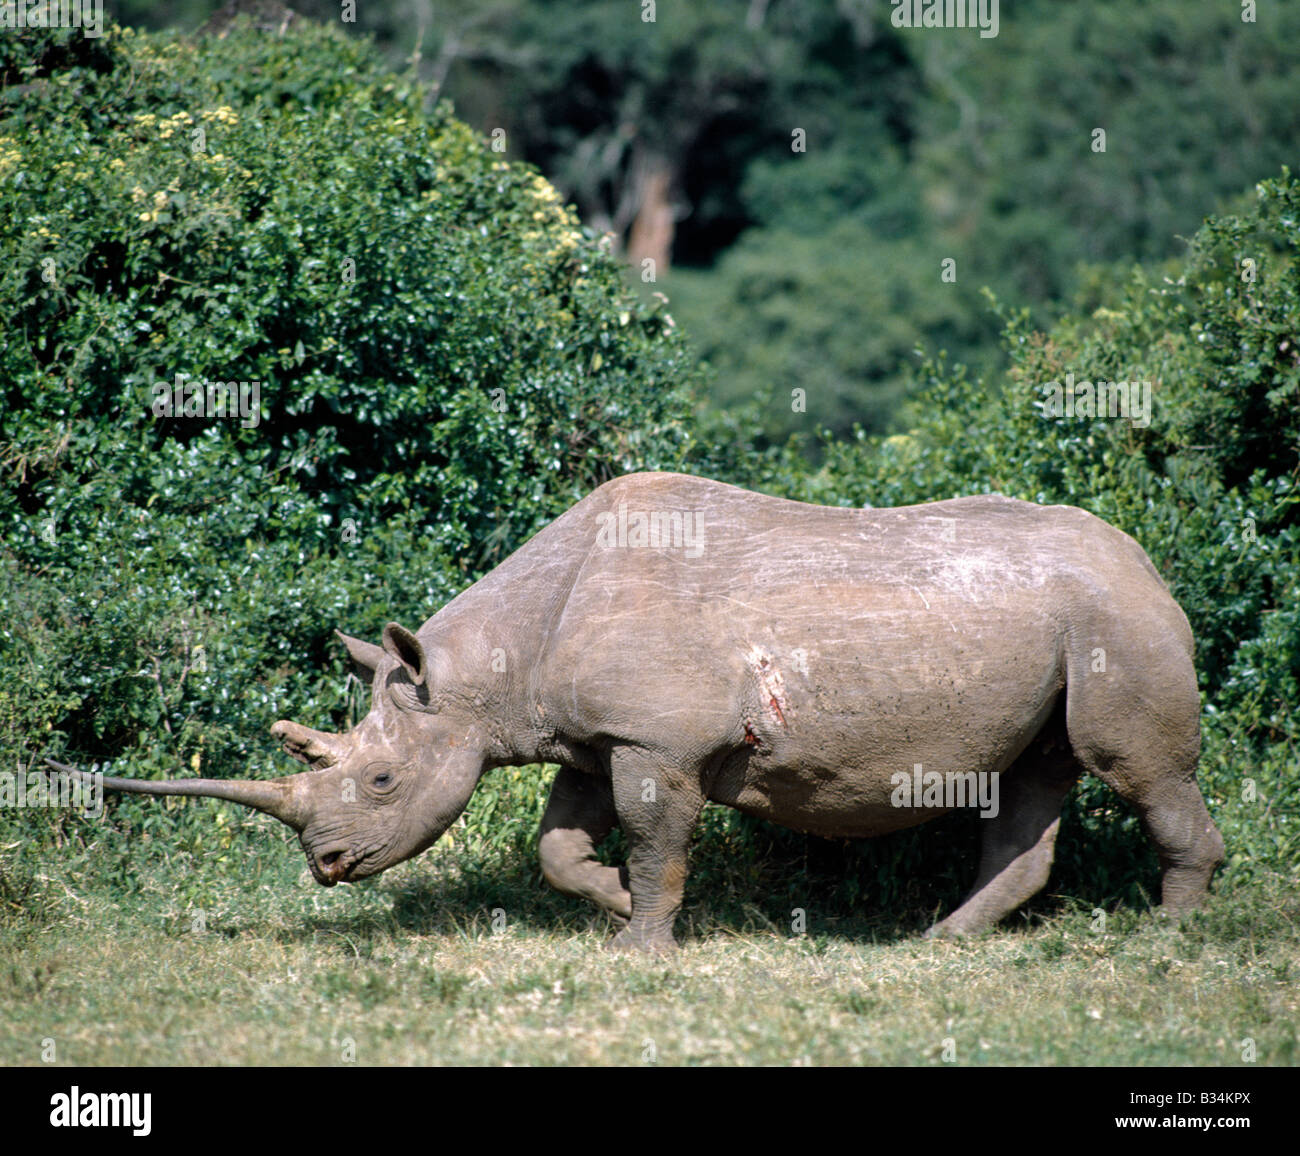 Kenya, Aberdare National Park, The Salient. A black rhino with a fine horn crosses a forest glade in the Aberdare National Park. . Stock Photo